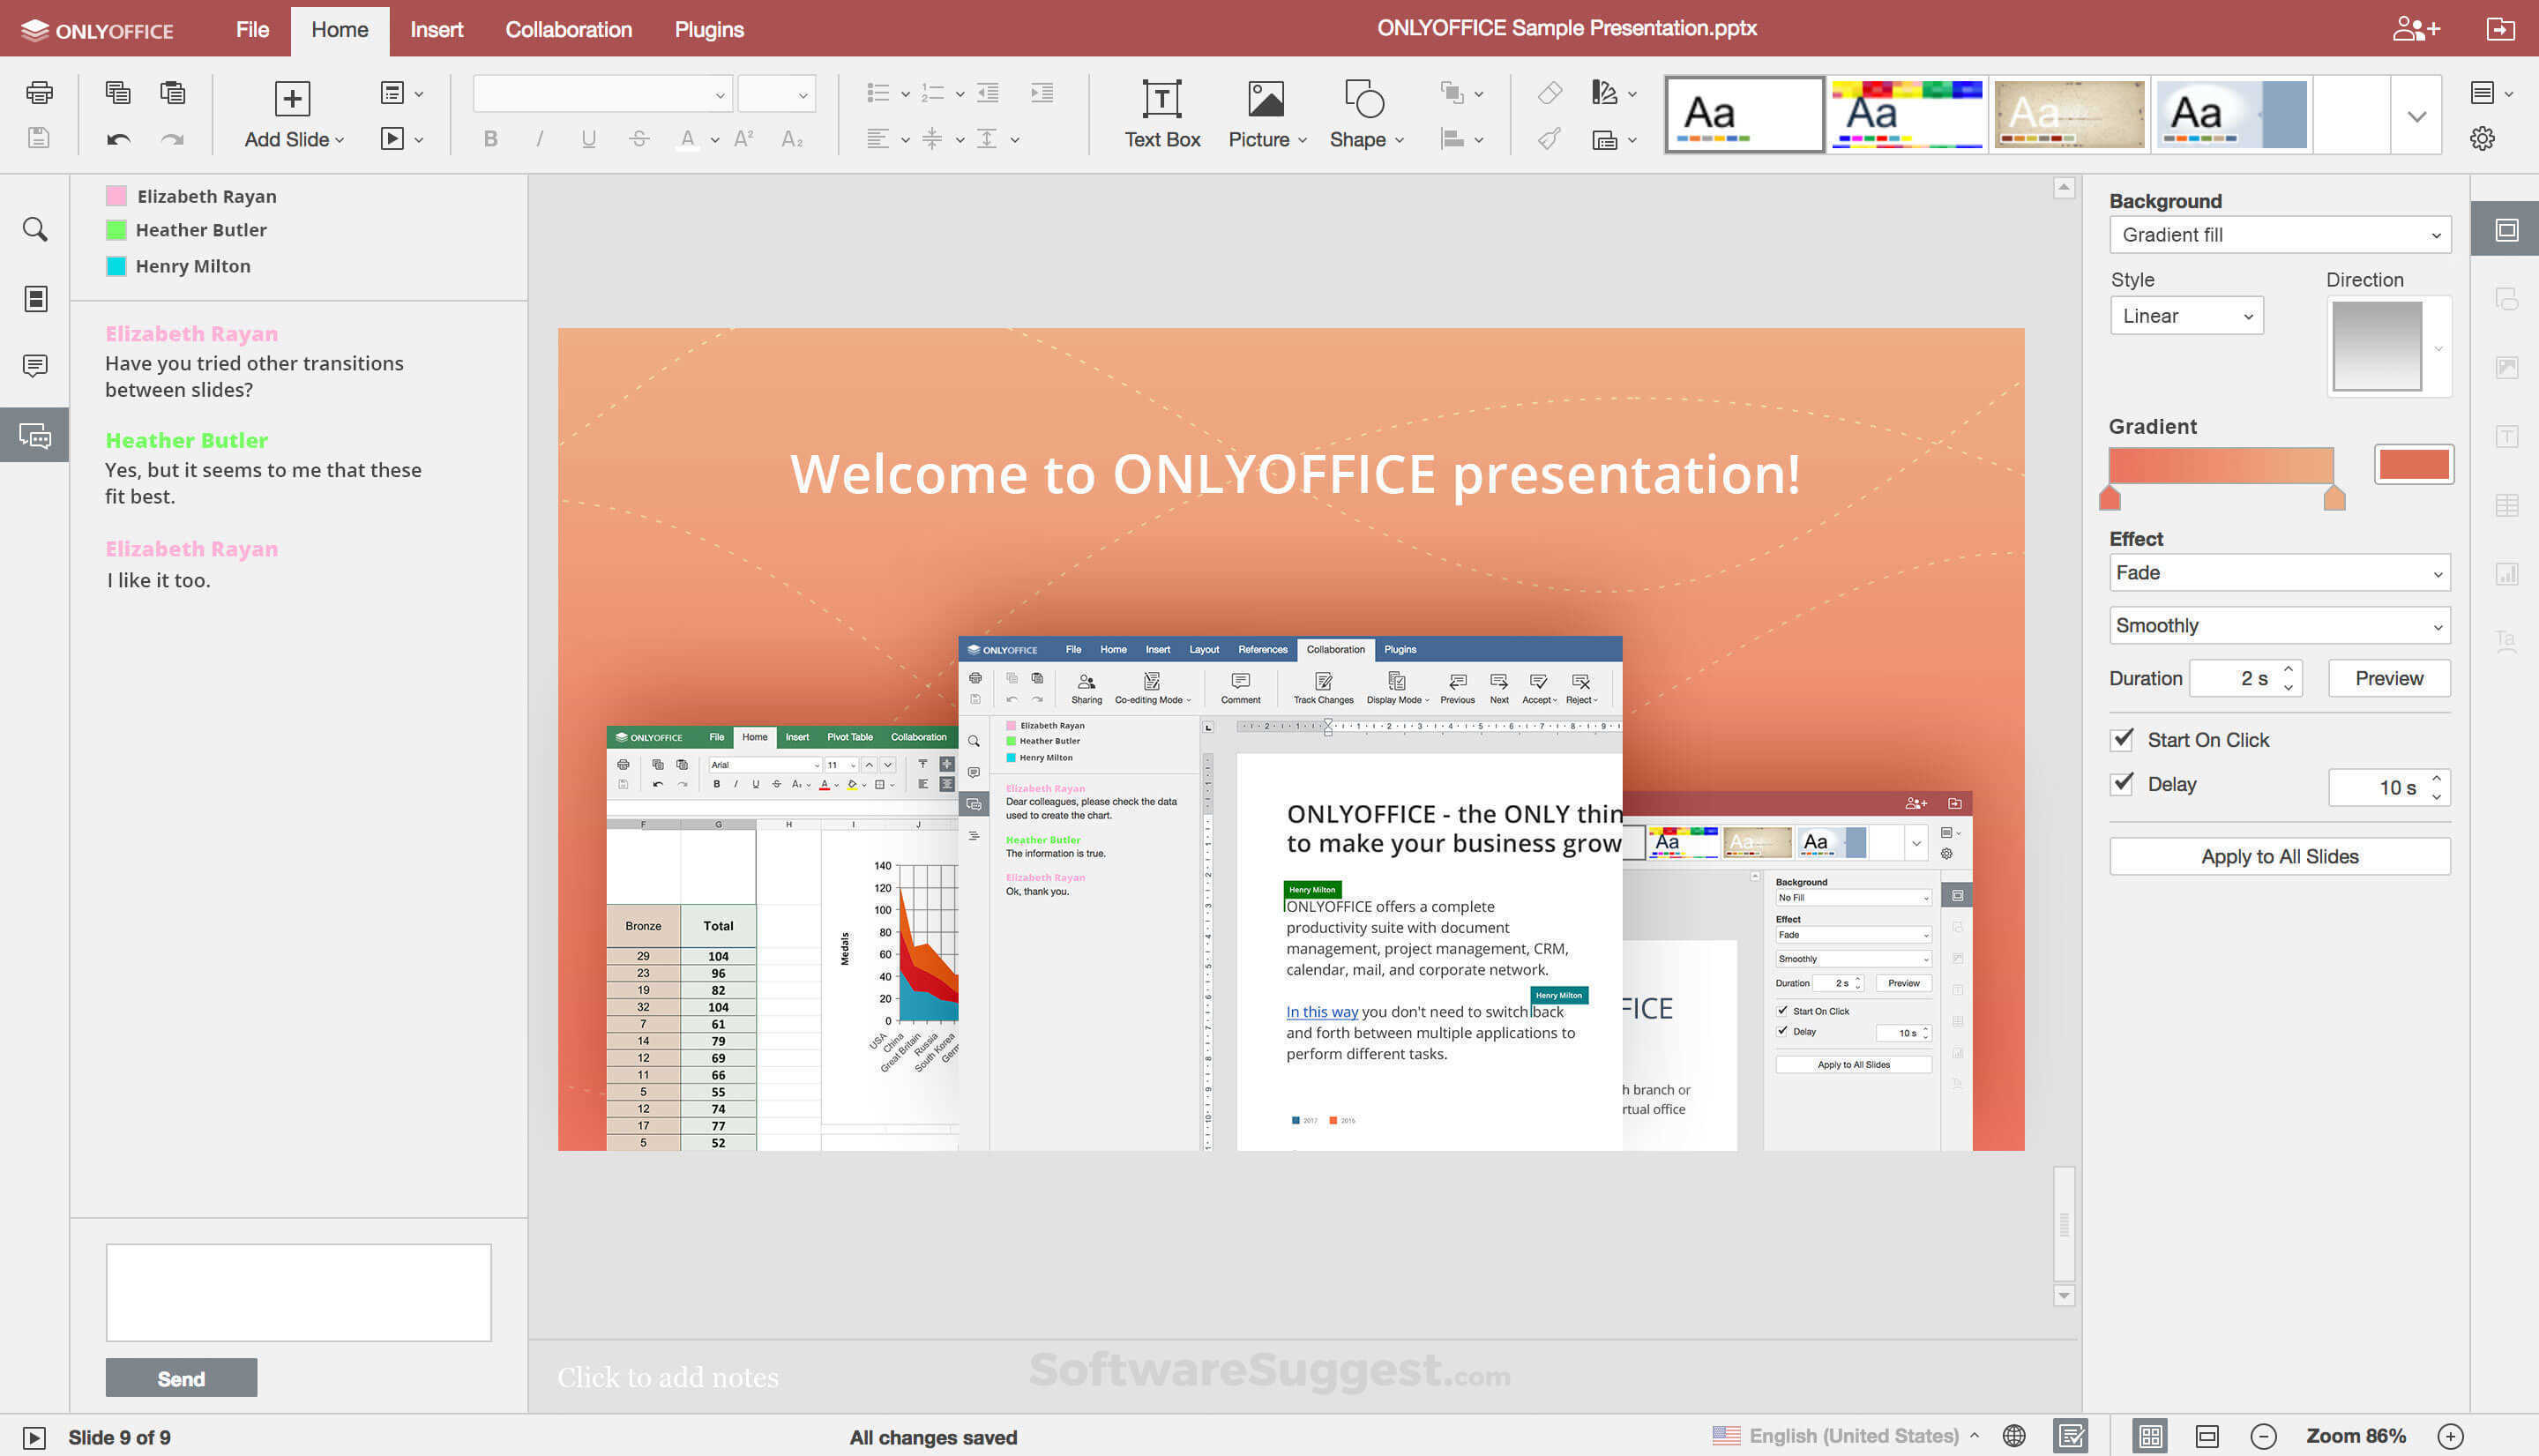 ONLYOFFICE 7.4.1.36 for apple download